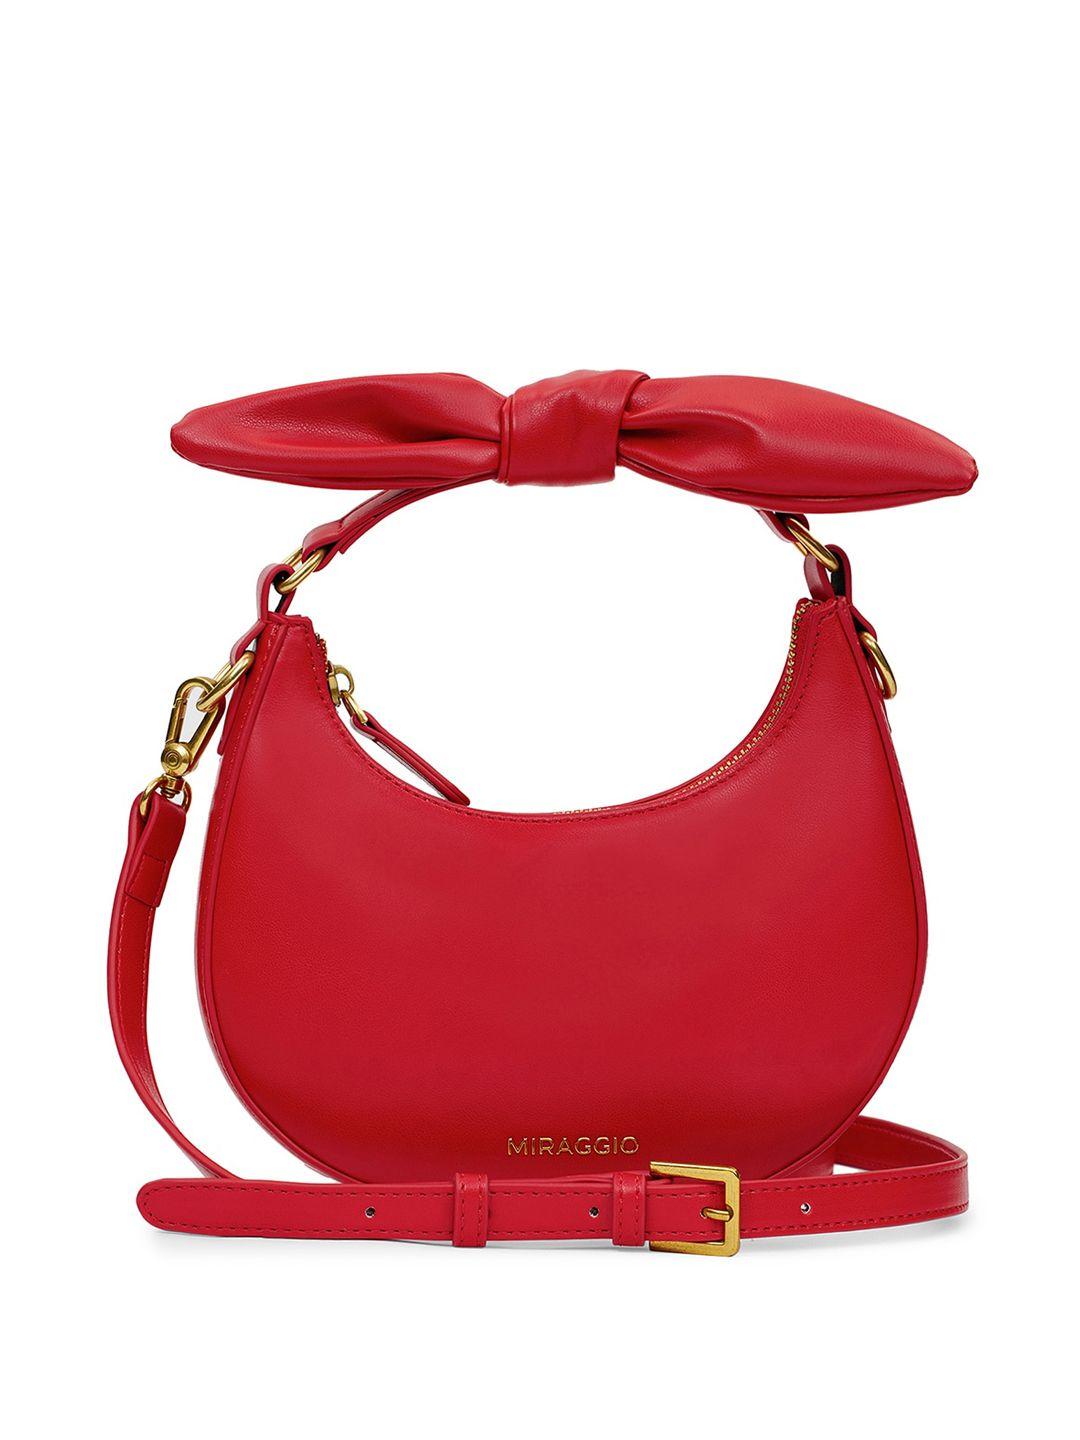 miraggio structured hobo bag with bow detail